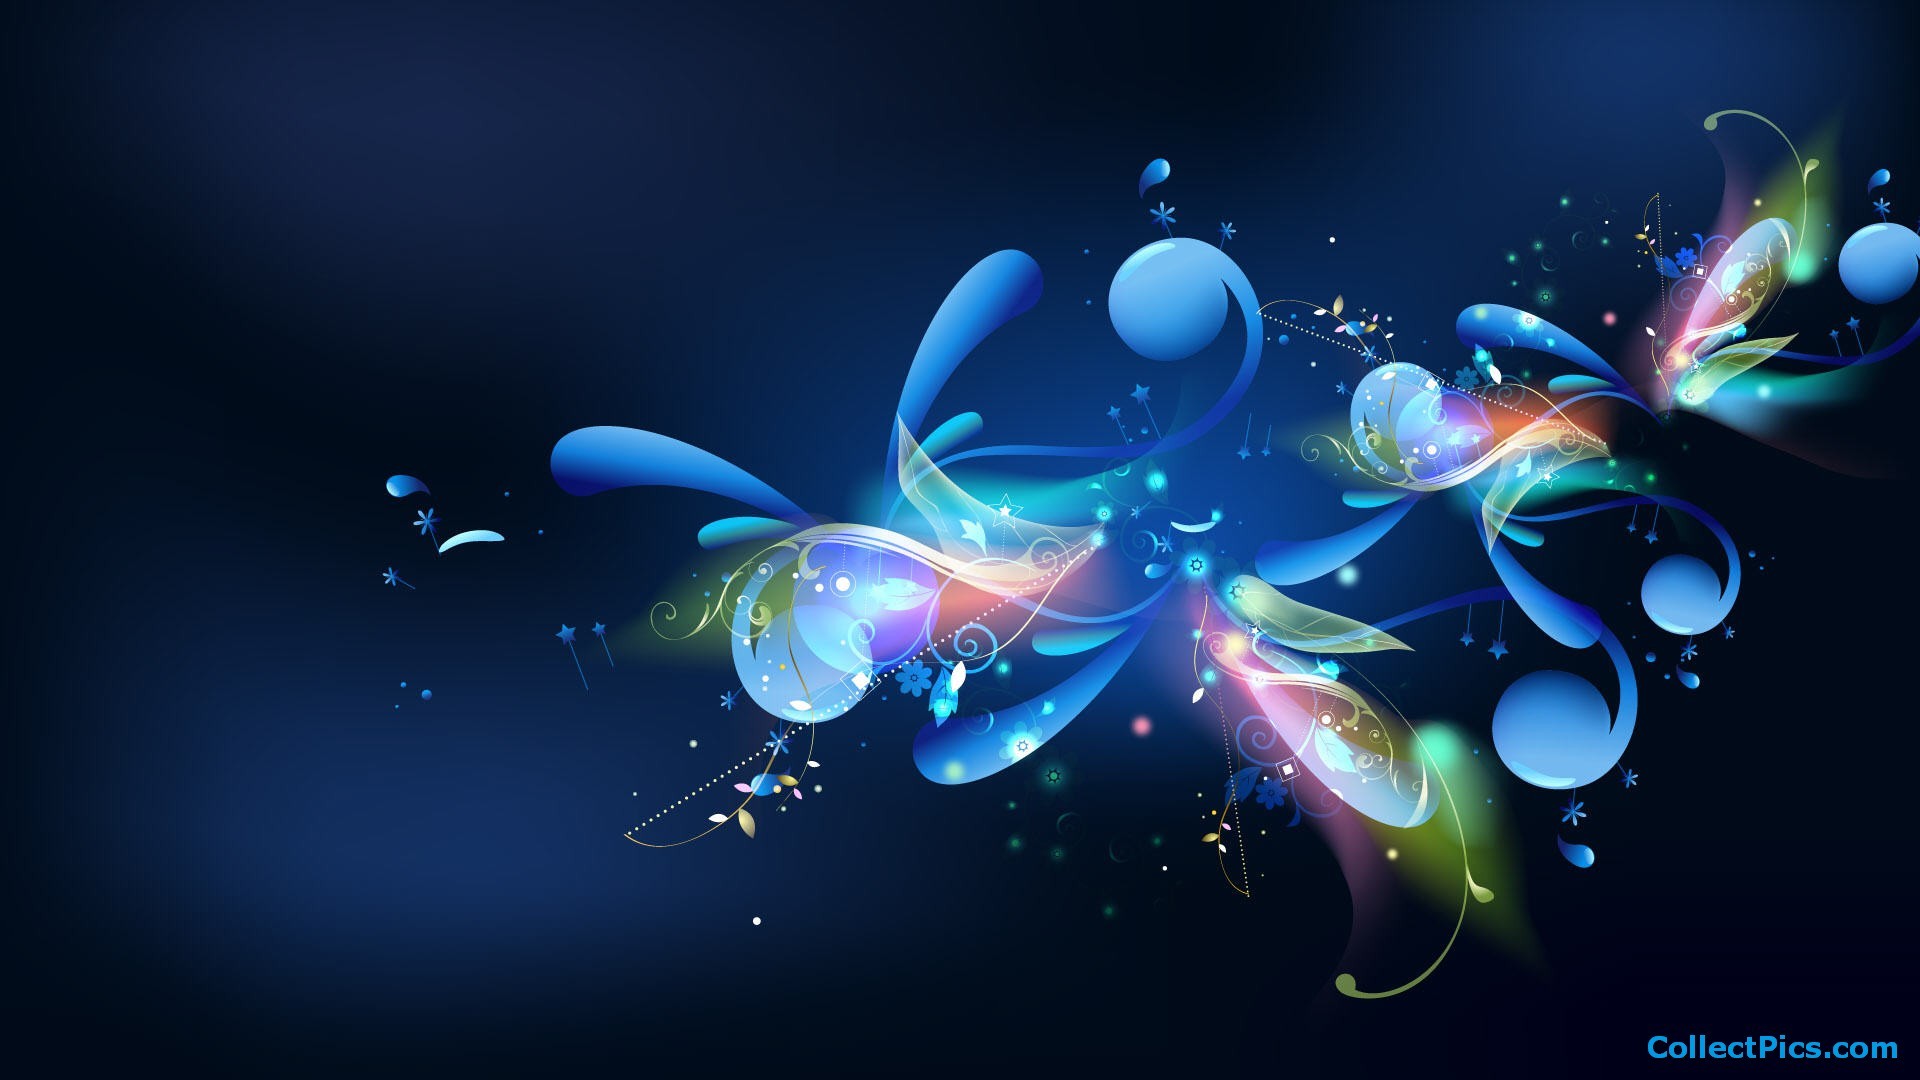 1920x1080 Name:colorful abstract wallpaper for desktop ,abstract wallpaper,desktop, wallpaper